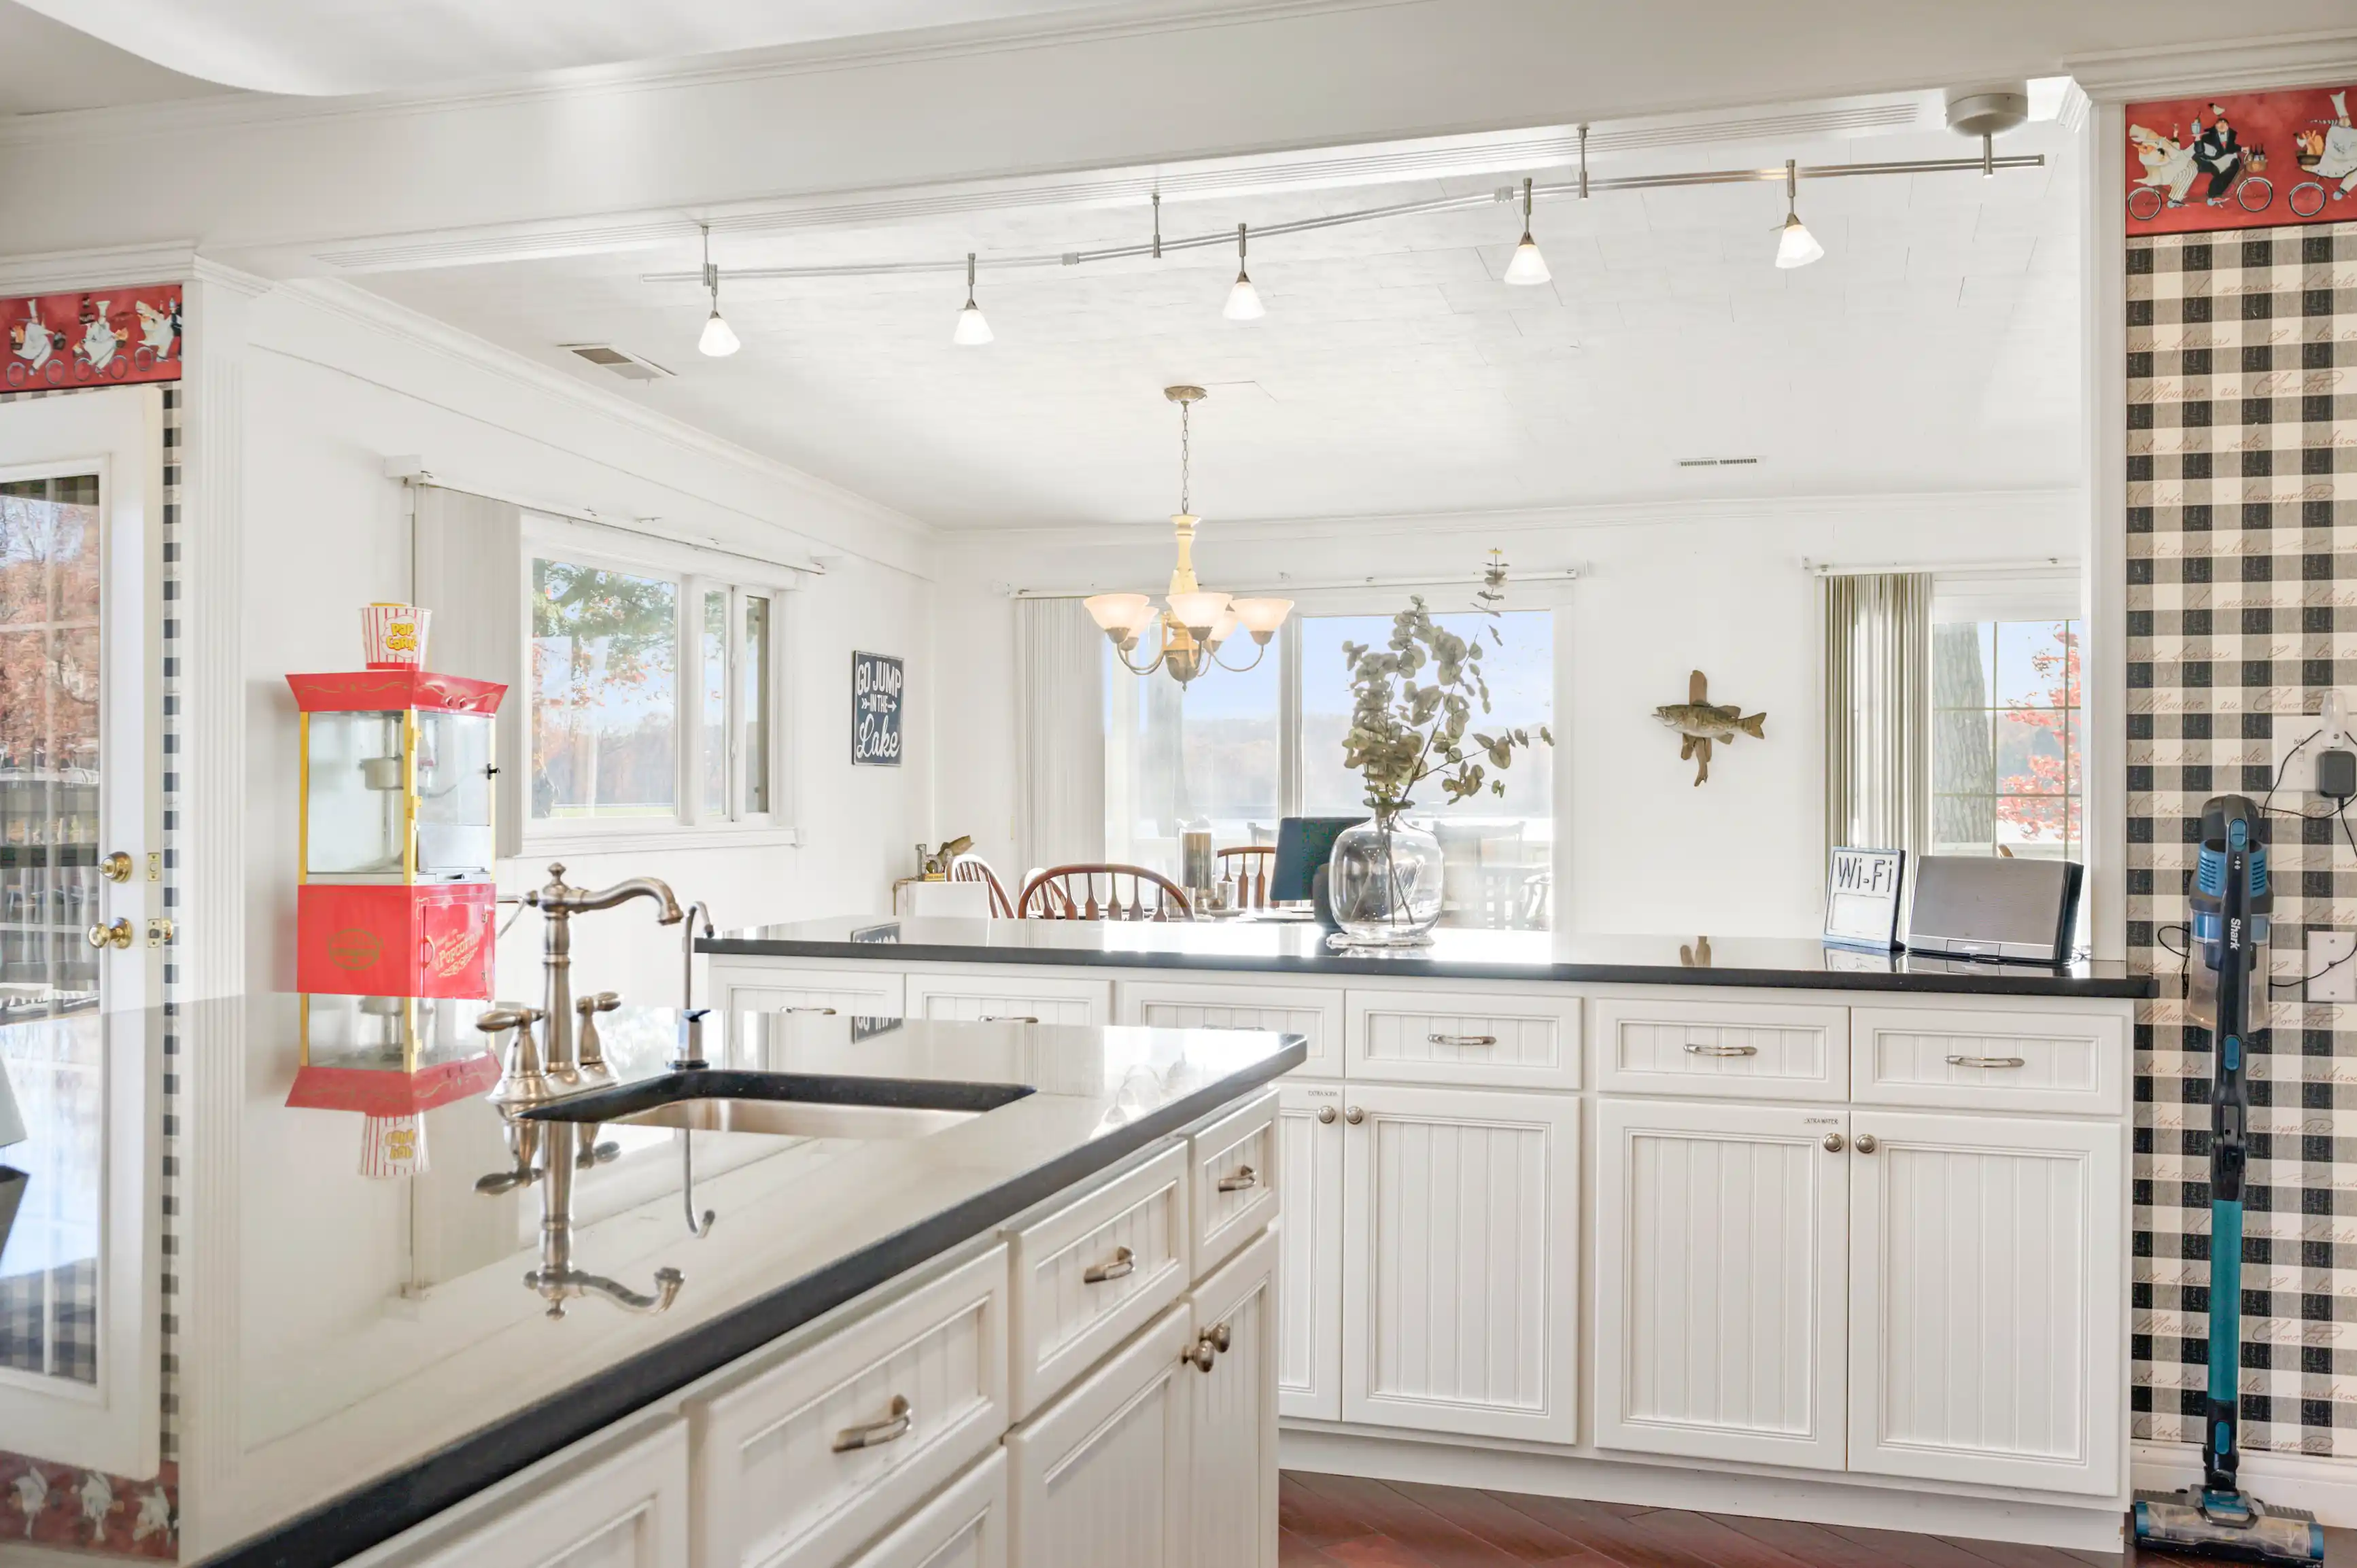 Bright kitchen with white cabinets, black countertops, a vintage popcorn machine, plaid wall decor, and a chandelier over an island.